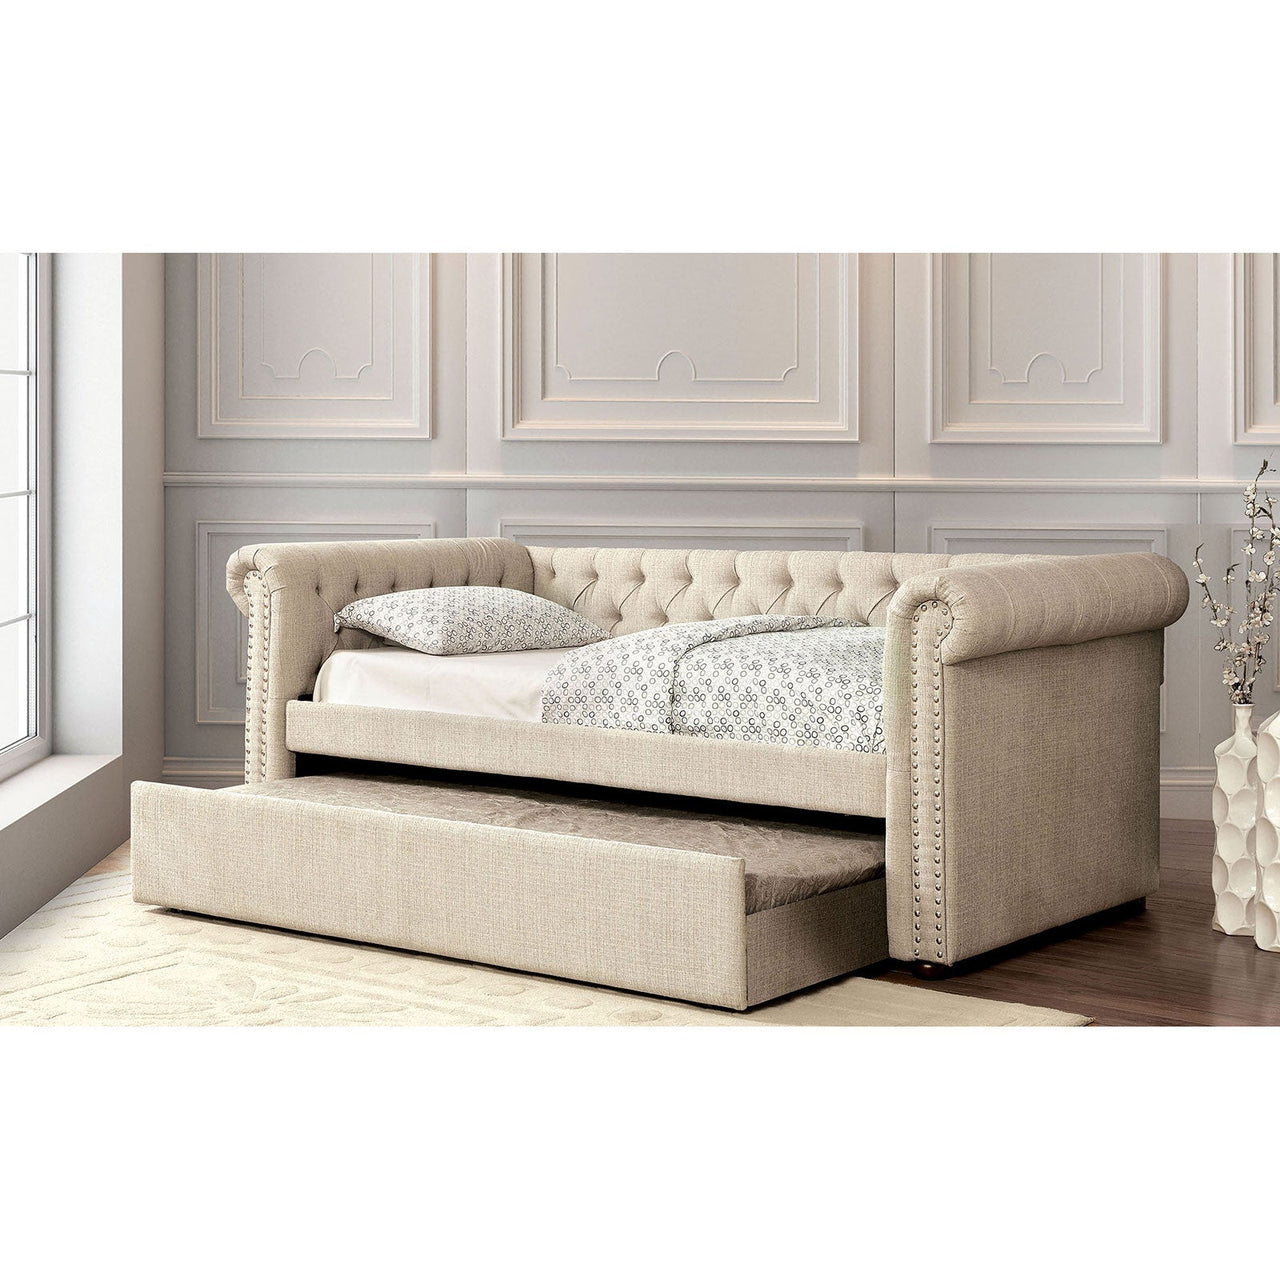 Leanna Beige/Brown Queen Daybed w/ Trundle, Beige image